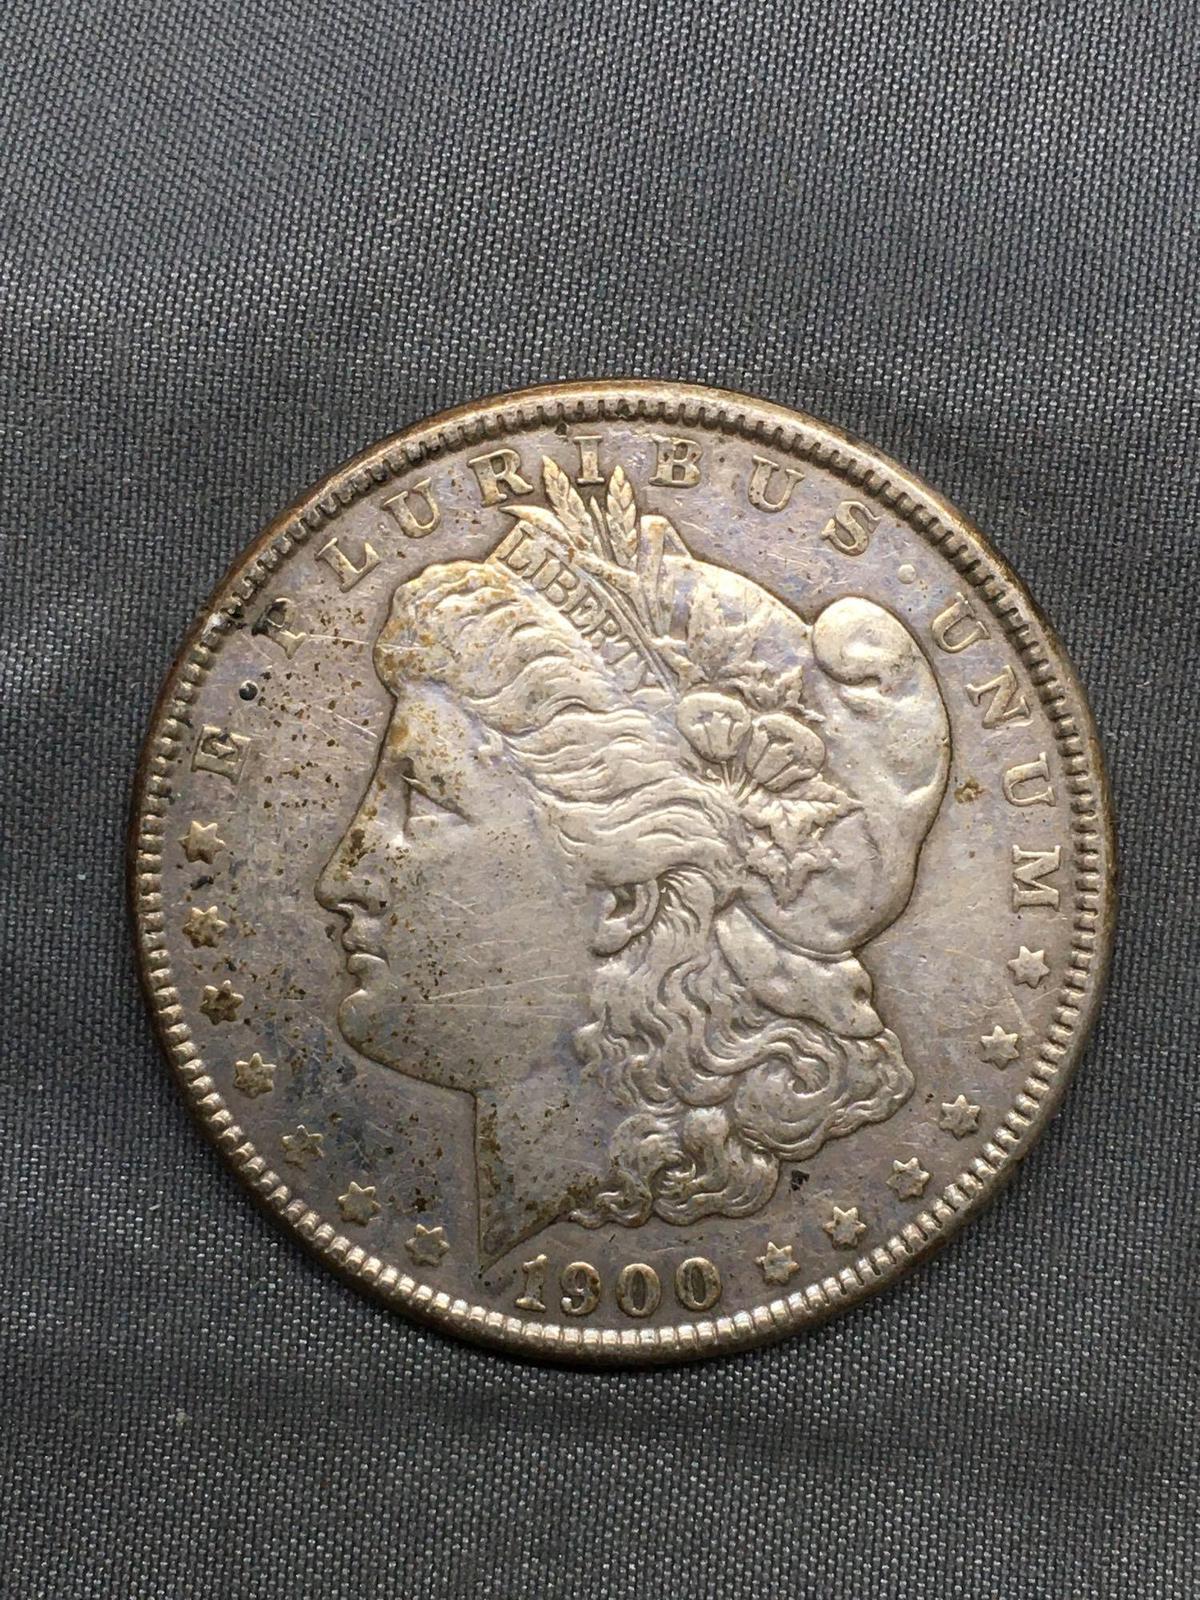 1900 United States Morgan Silver Dollar - 90% Silver Coin from Estate Collection